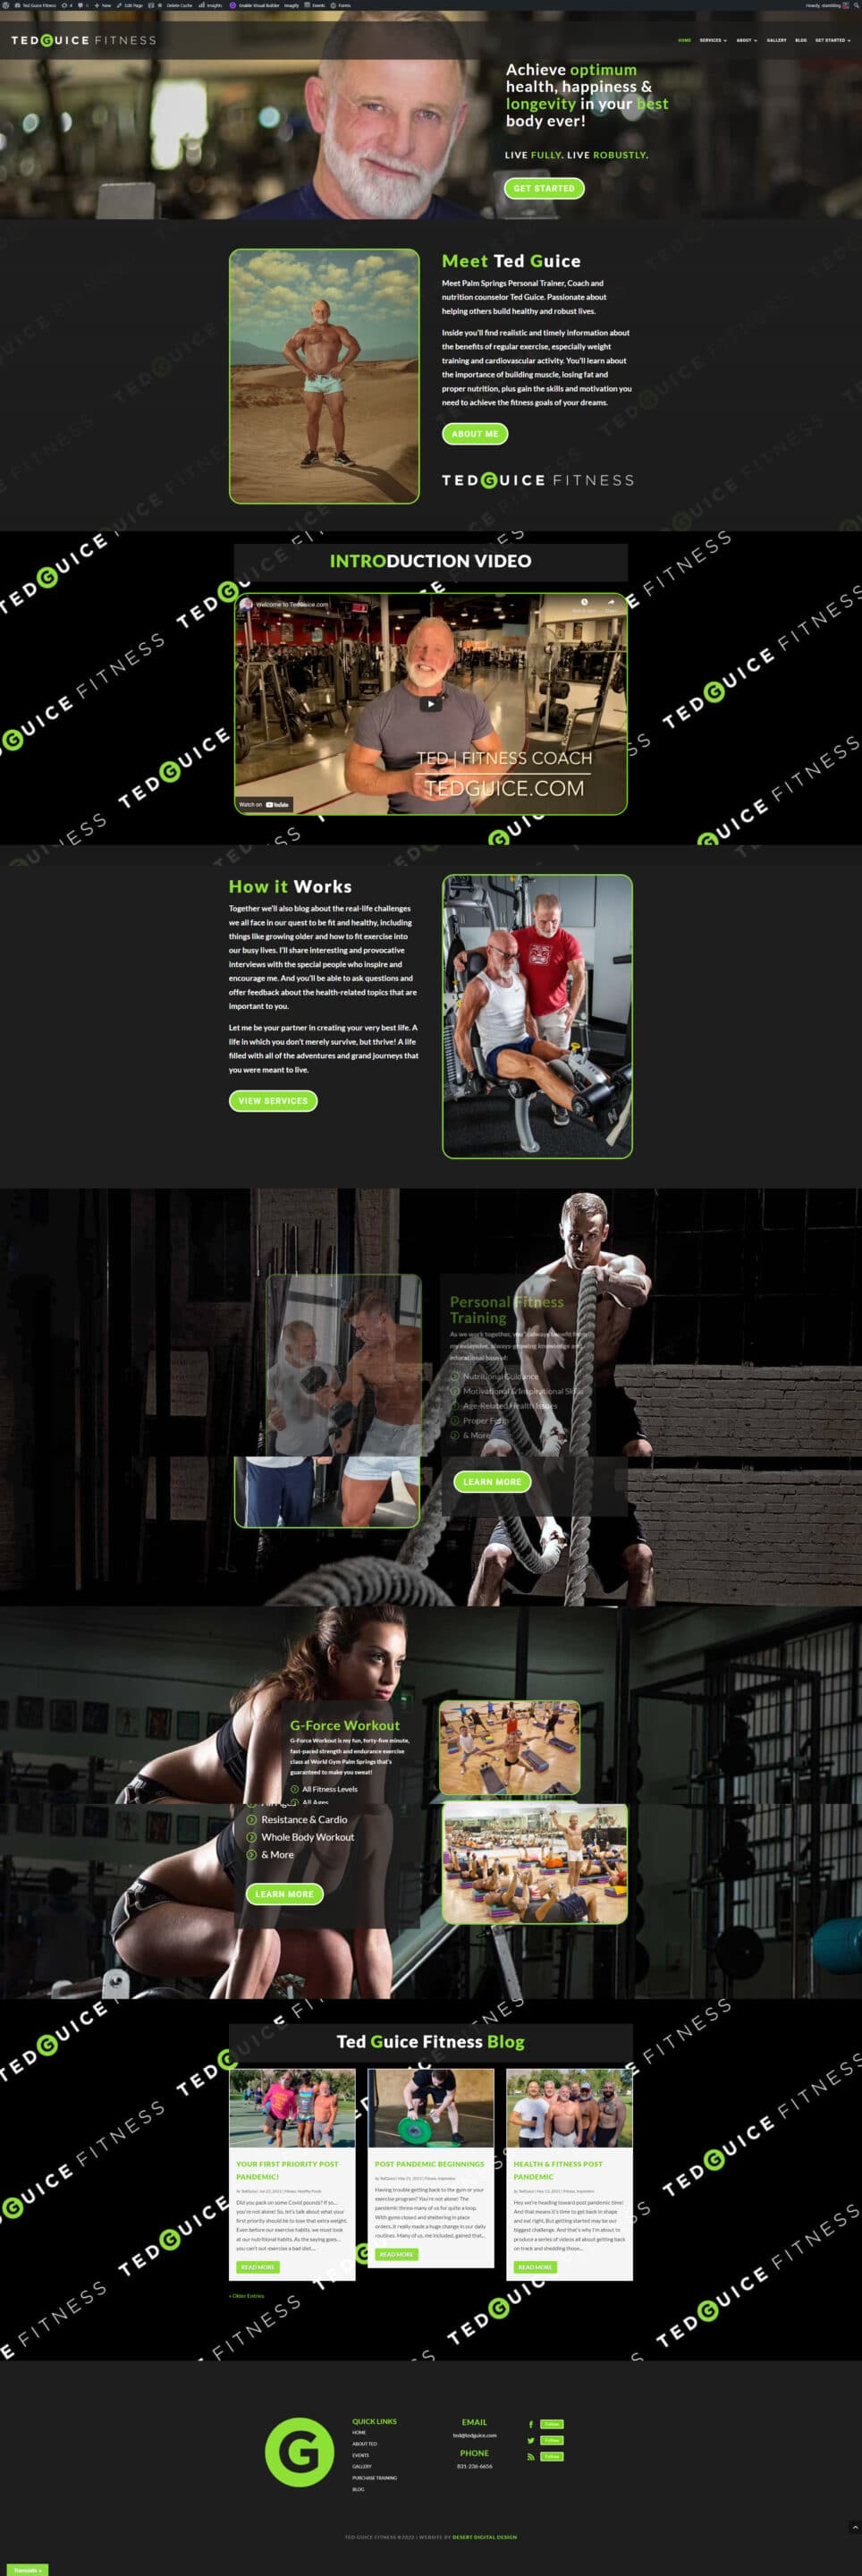 Ted Guice Fitness by Desert Digital Design in Palm Springs, CA. 